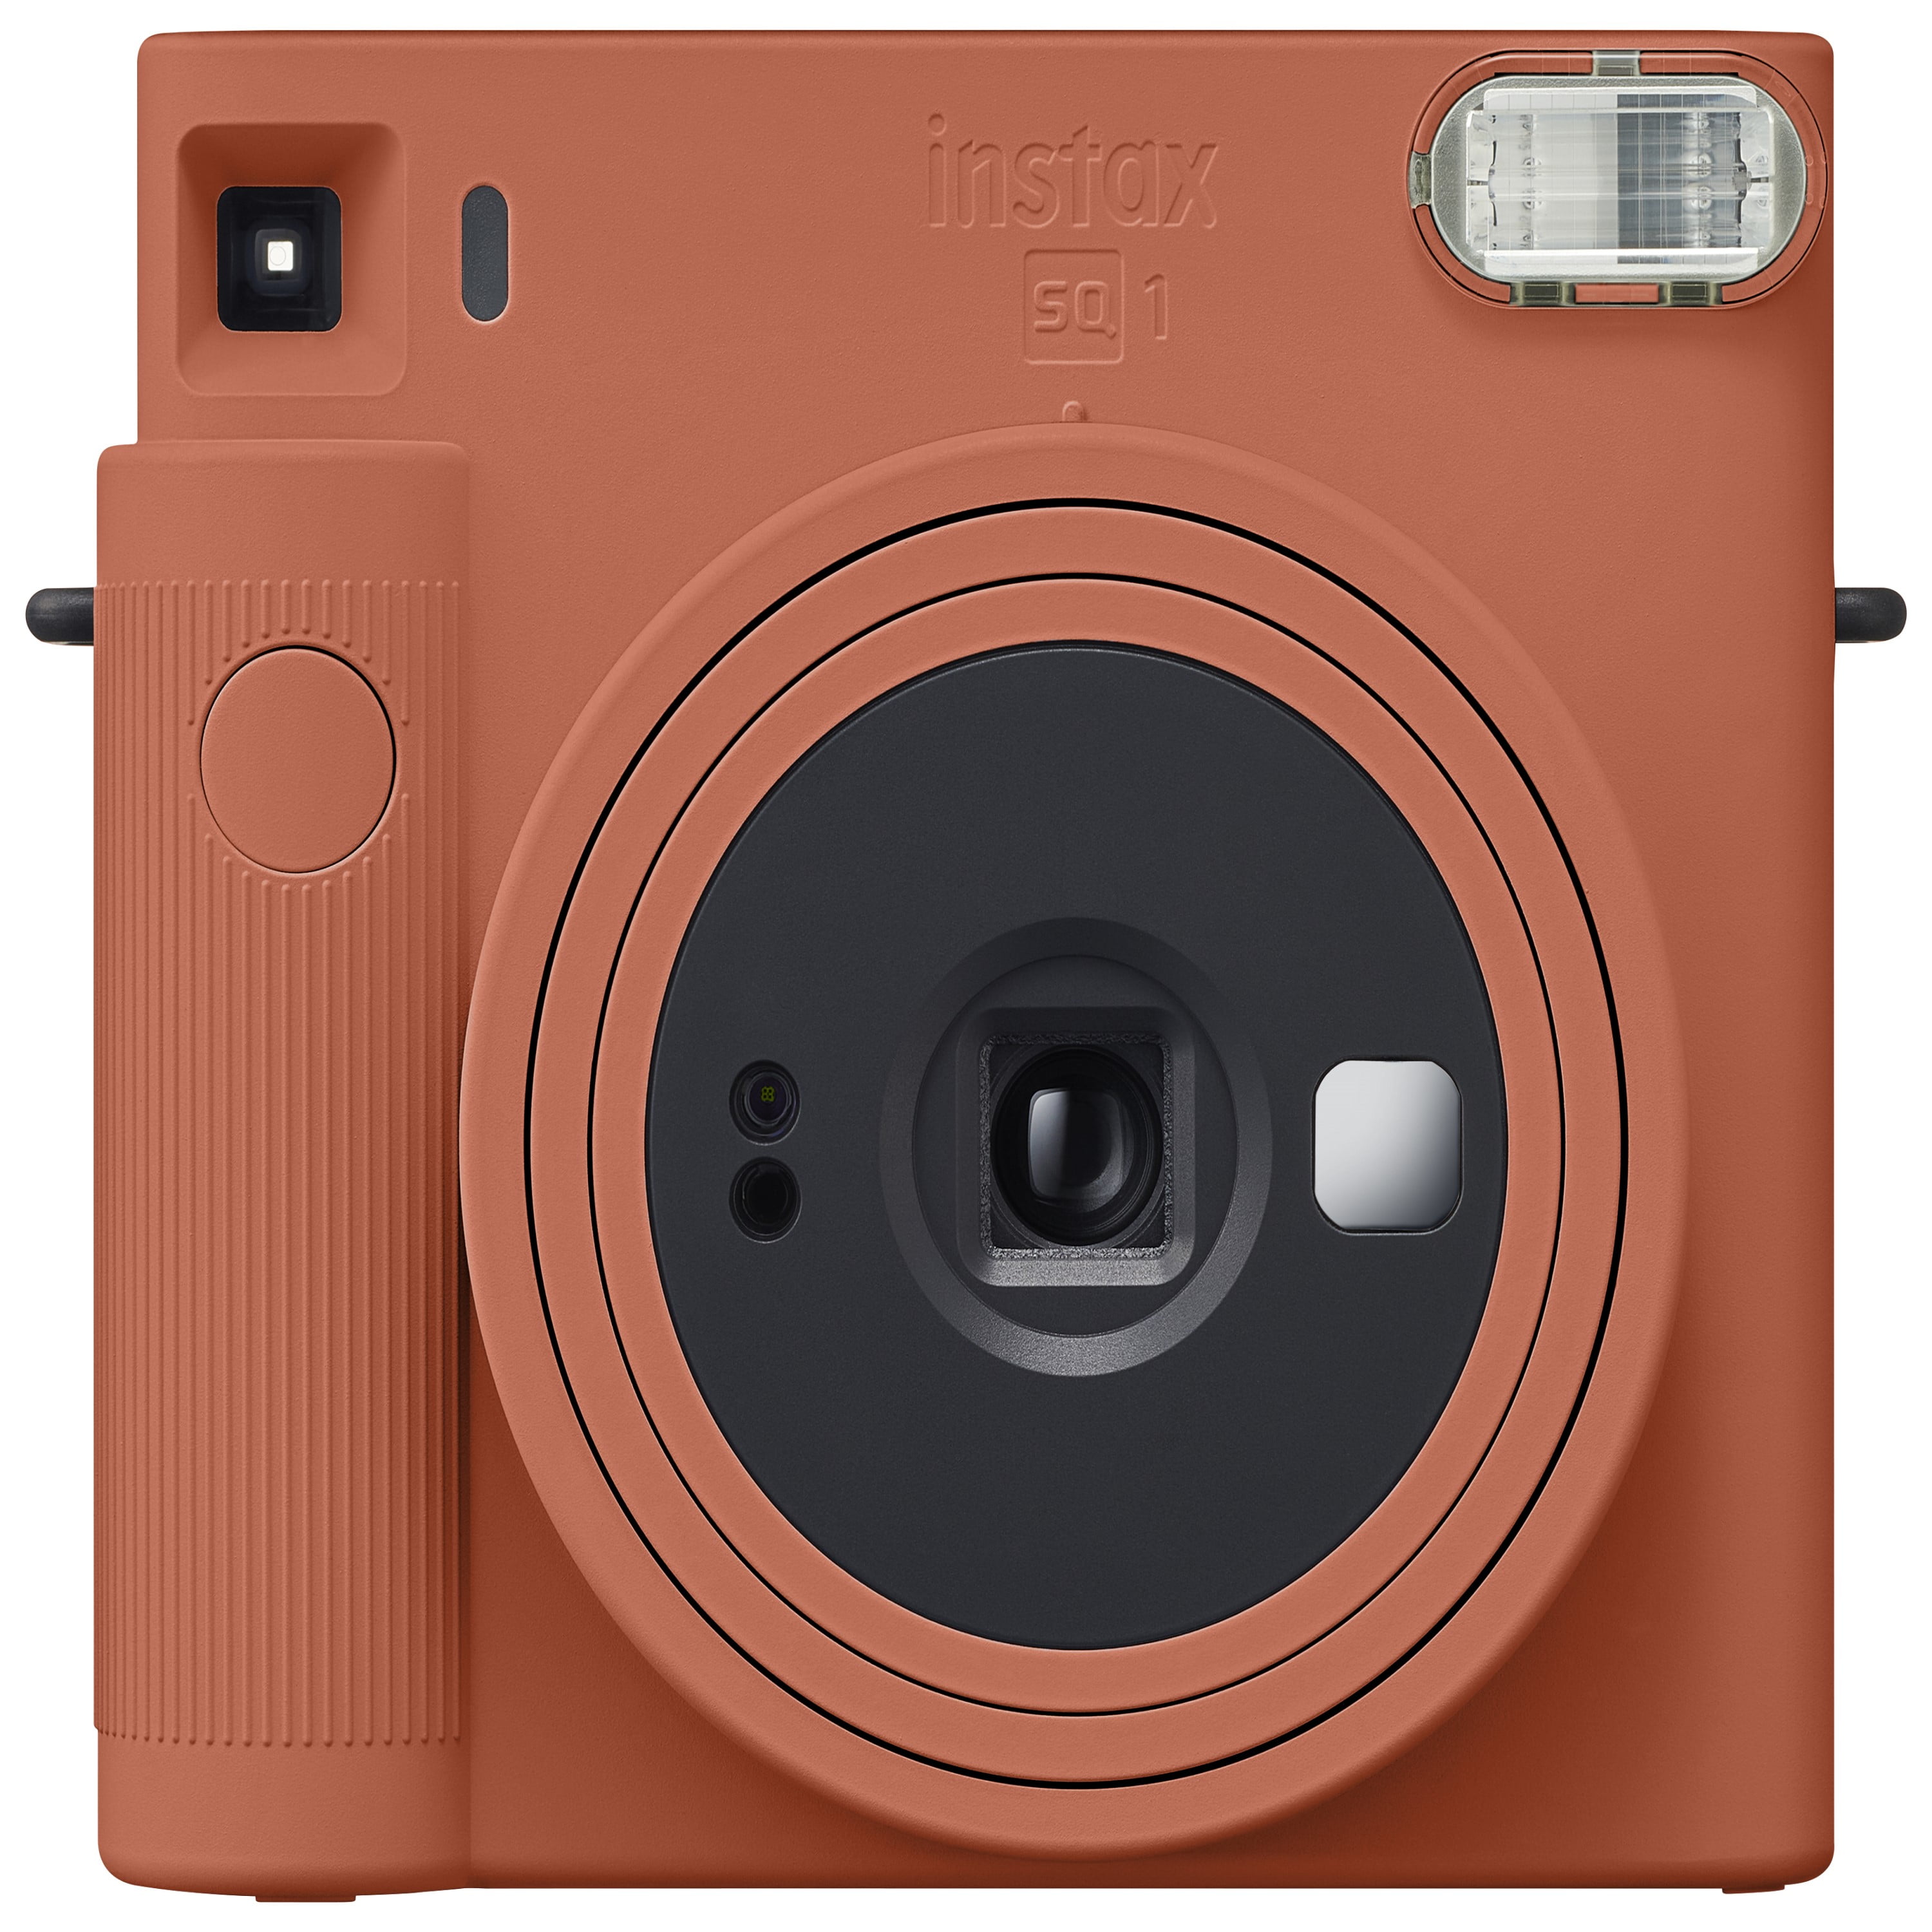 Fujifilm's new Instax Square SQ1: the instant camera back to its